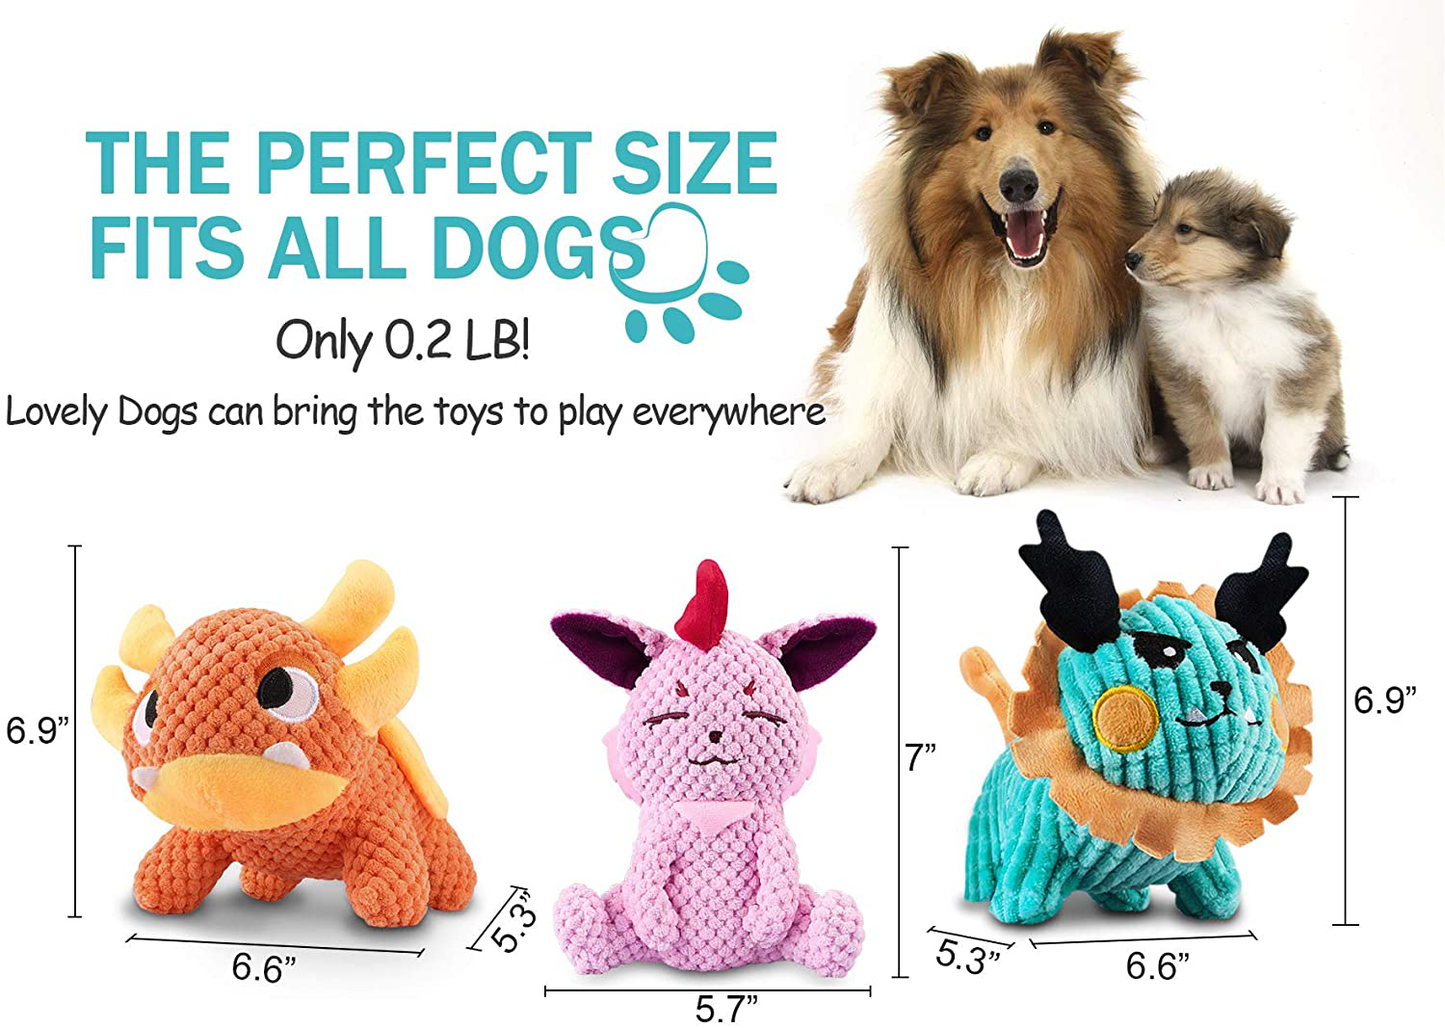 UNIWILAND Latest Squeaky Plush Dog Toys Pack for Puppy, 3 Pack Durable Stuffed Animal Plush Chew Toys with Squeakers, Cute Soft Dog Toys for Teeth Cleaning, for Small Medium Large Dogs Animals & Pet Supplies > Pet Supplies > Dog Supplies > Dog Toys UNIWILAND   